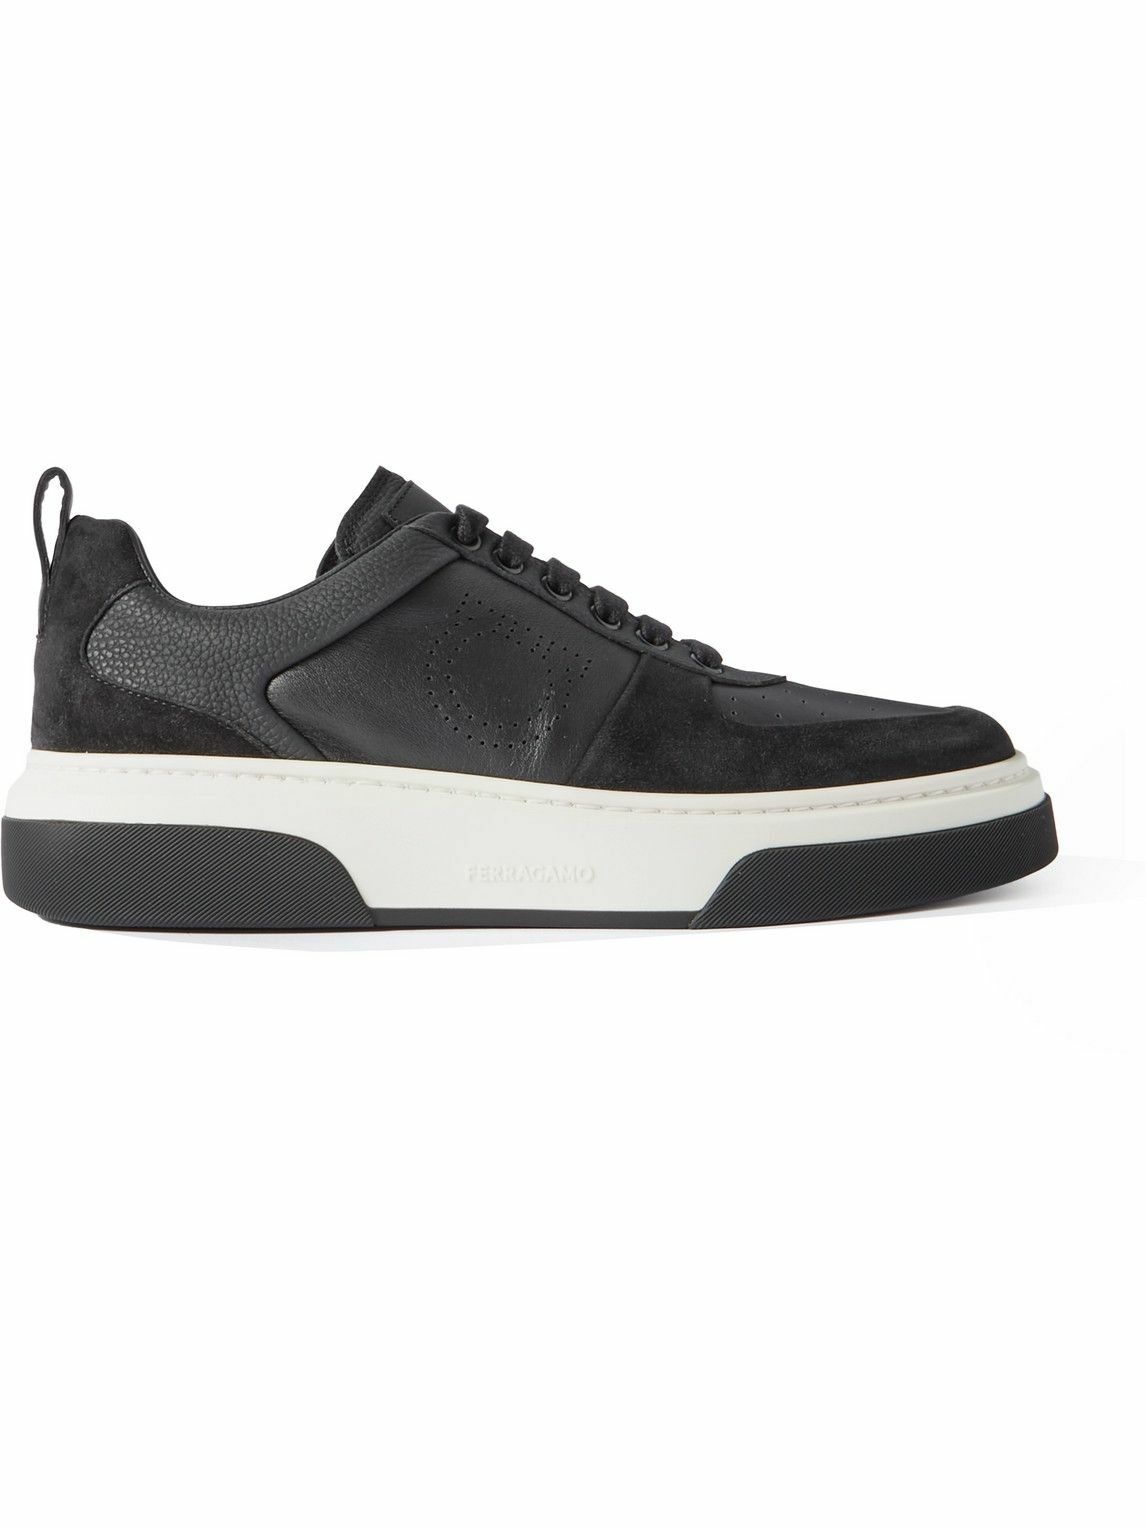 FERRAGAMO - Cassetta Suede-Trimmed Perforated Leather Sneakers - Black ...